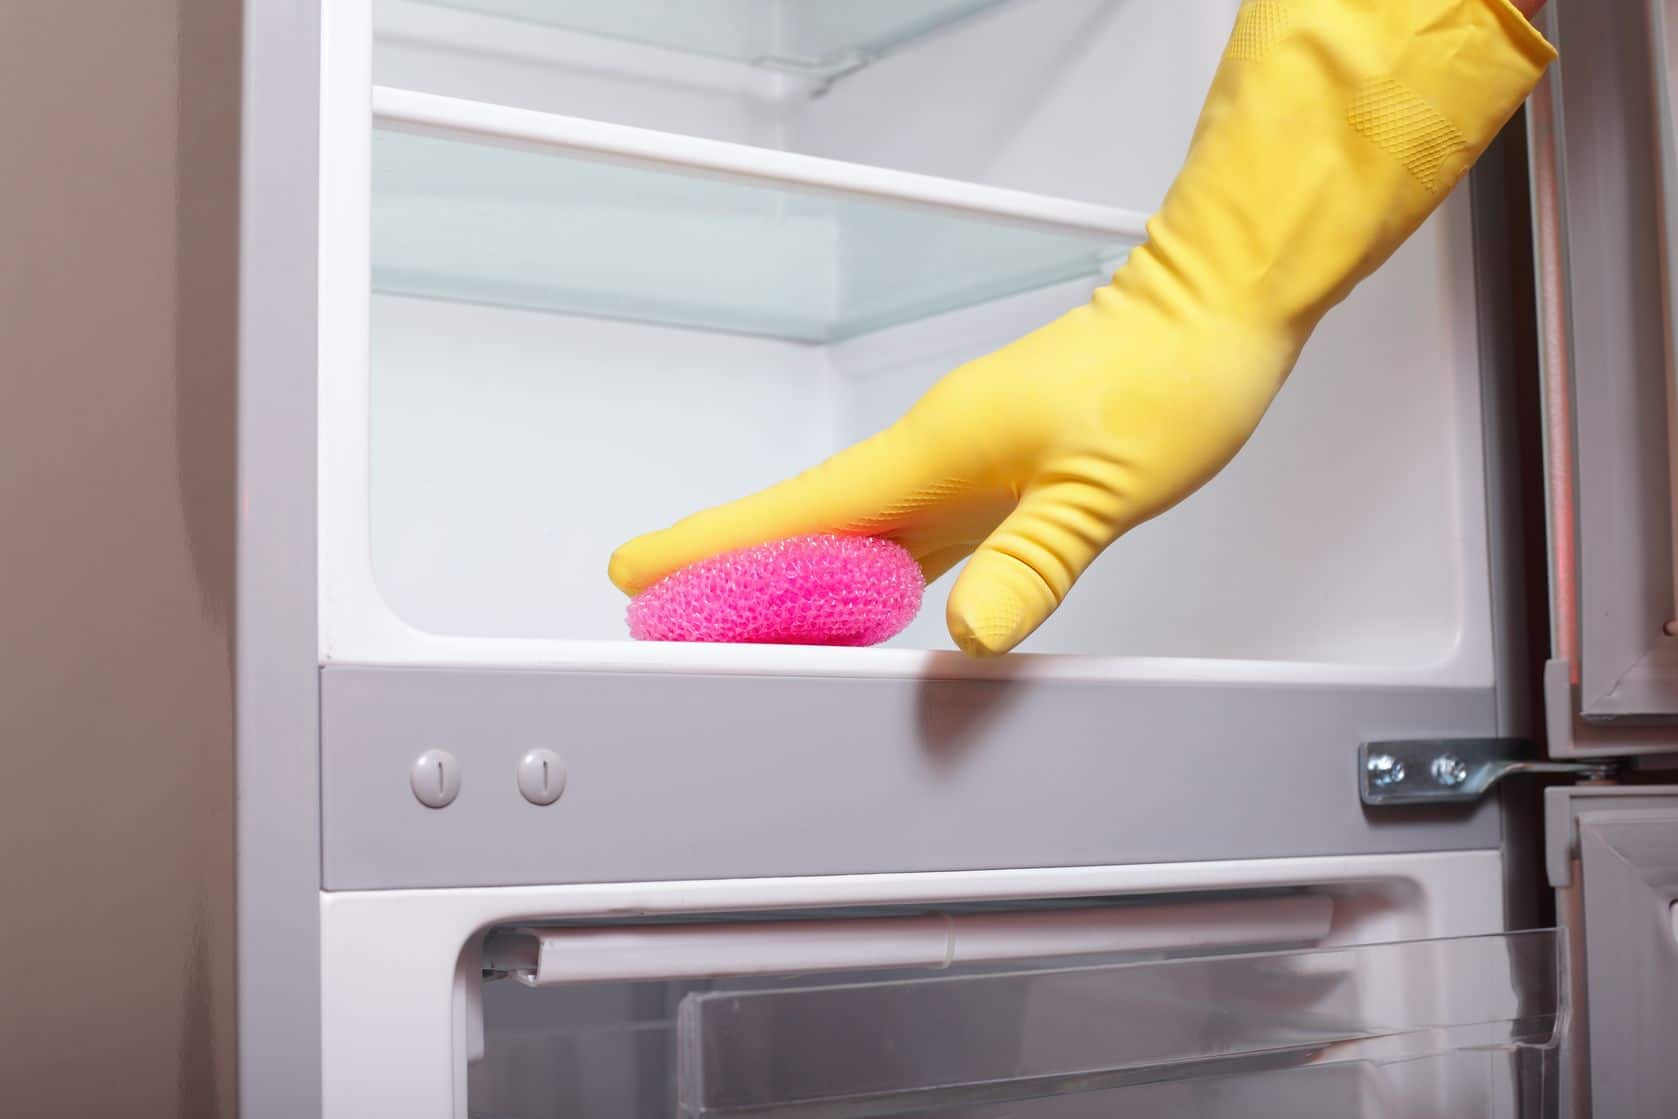 Spring clean your kitchen by scrubbing your fridge and freezer. 